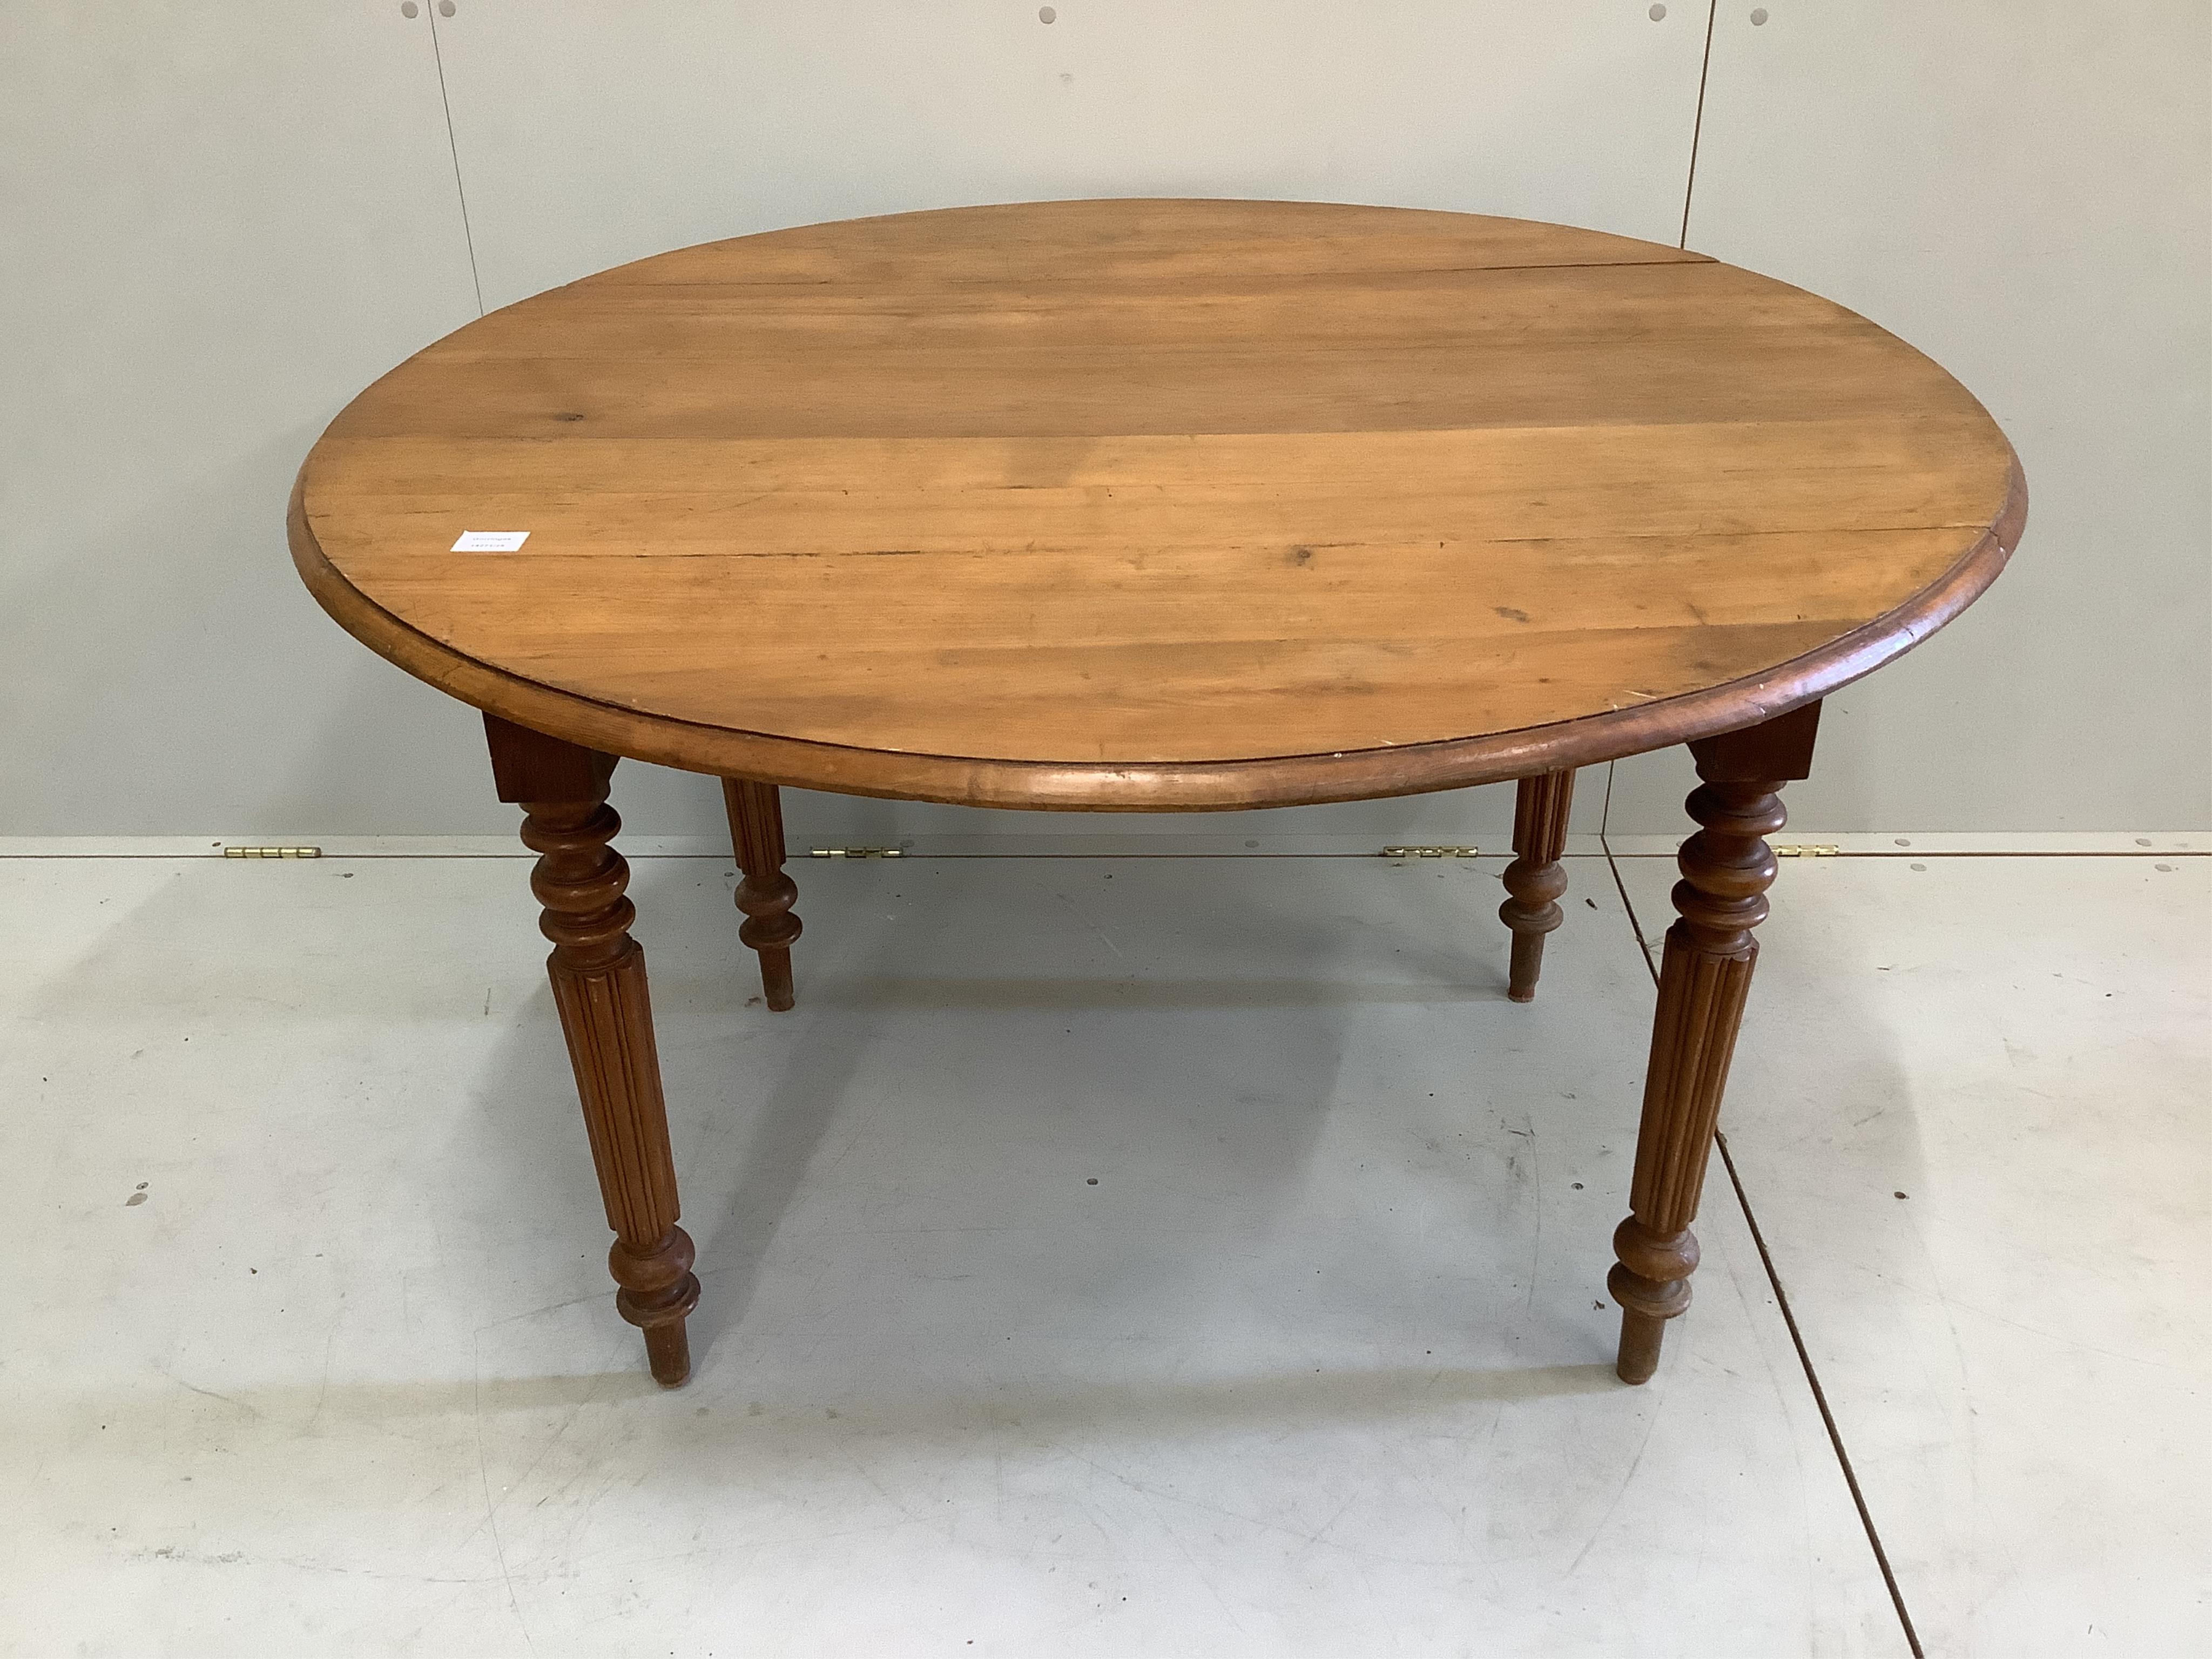 A 19th century French pine drop leaf kitchen table, width 118cm, depth 66cm, height 72cm